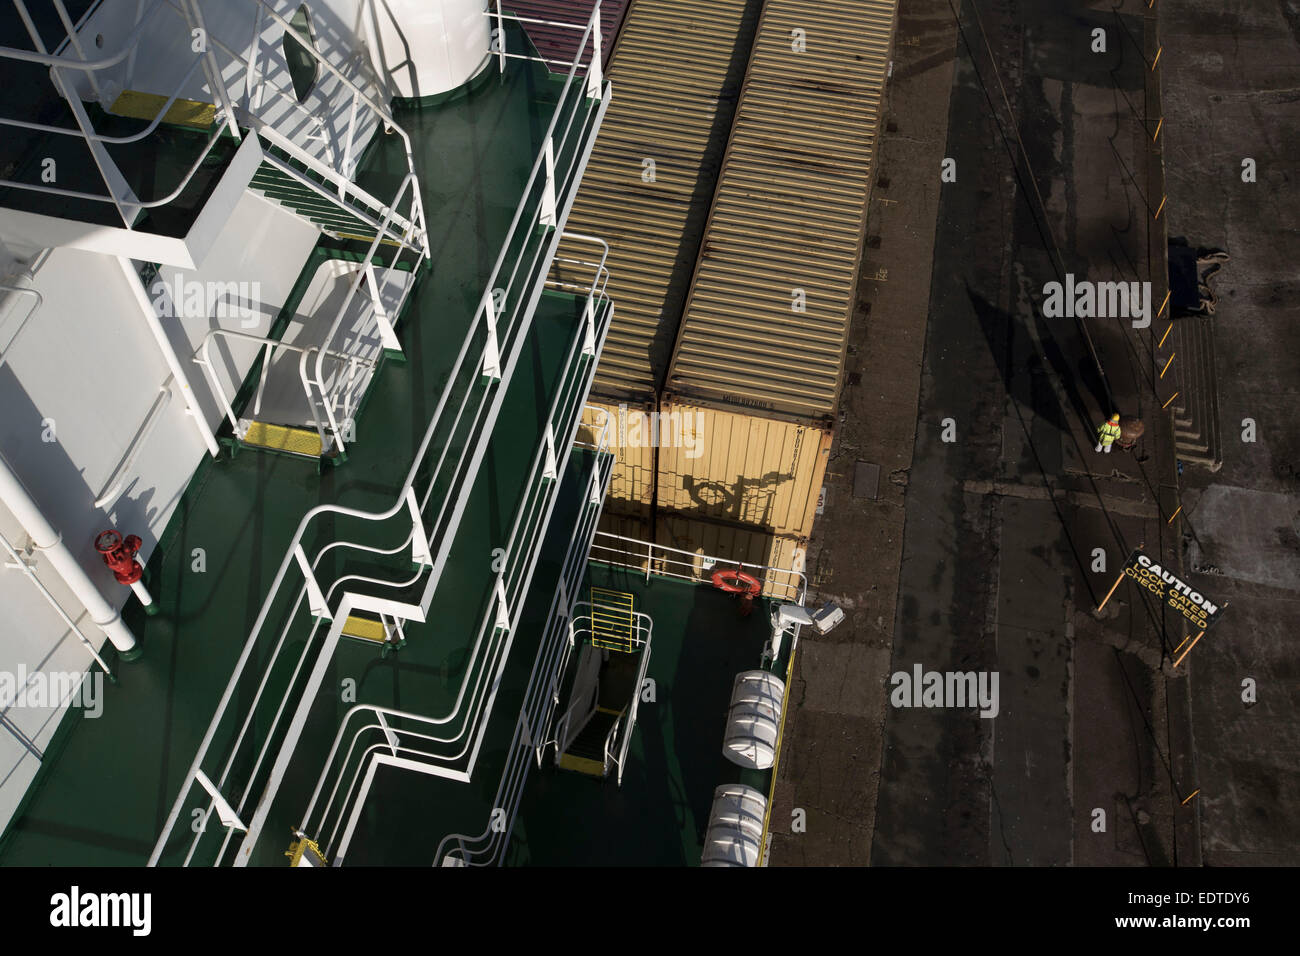 The decks of the Panama-registered container ship MSC Sandra, sailing from Seaforth Docks, Liverpool, UK. Stock Photo